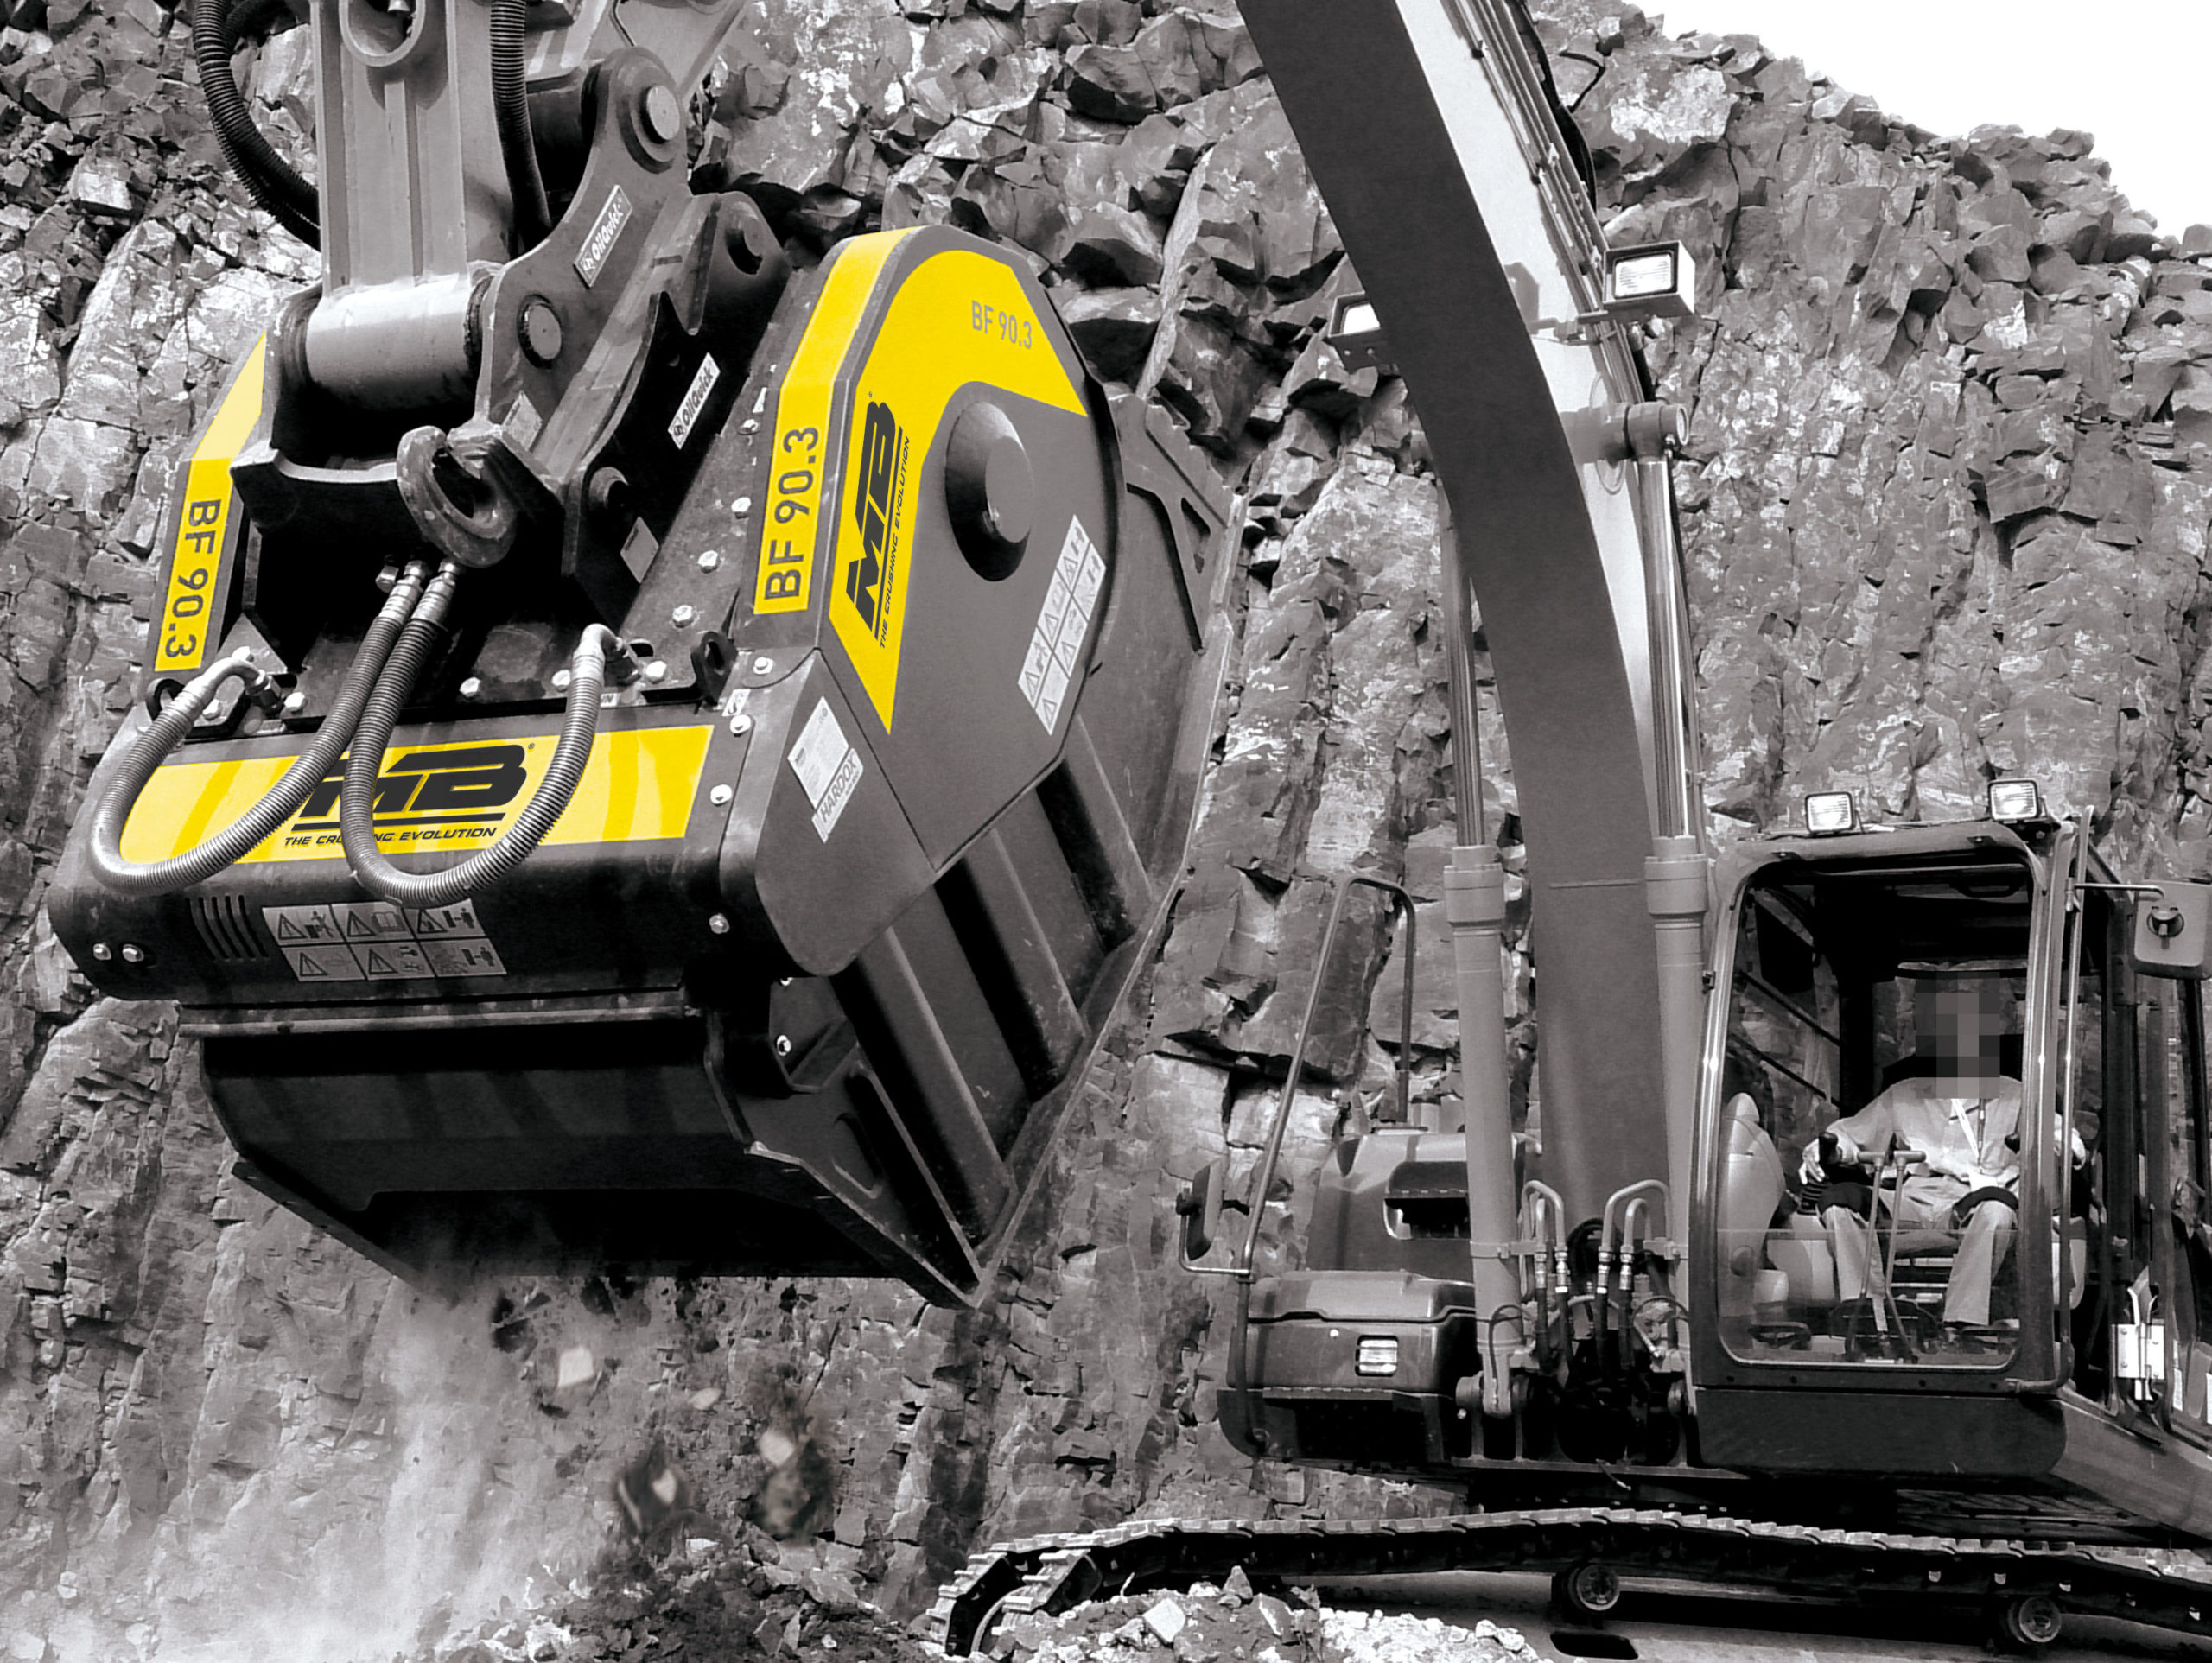 Ranking of the best crusher buckets for excavator for 2022